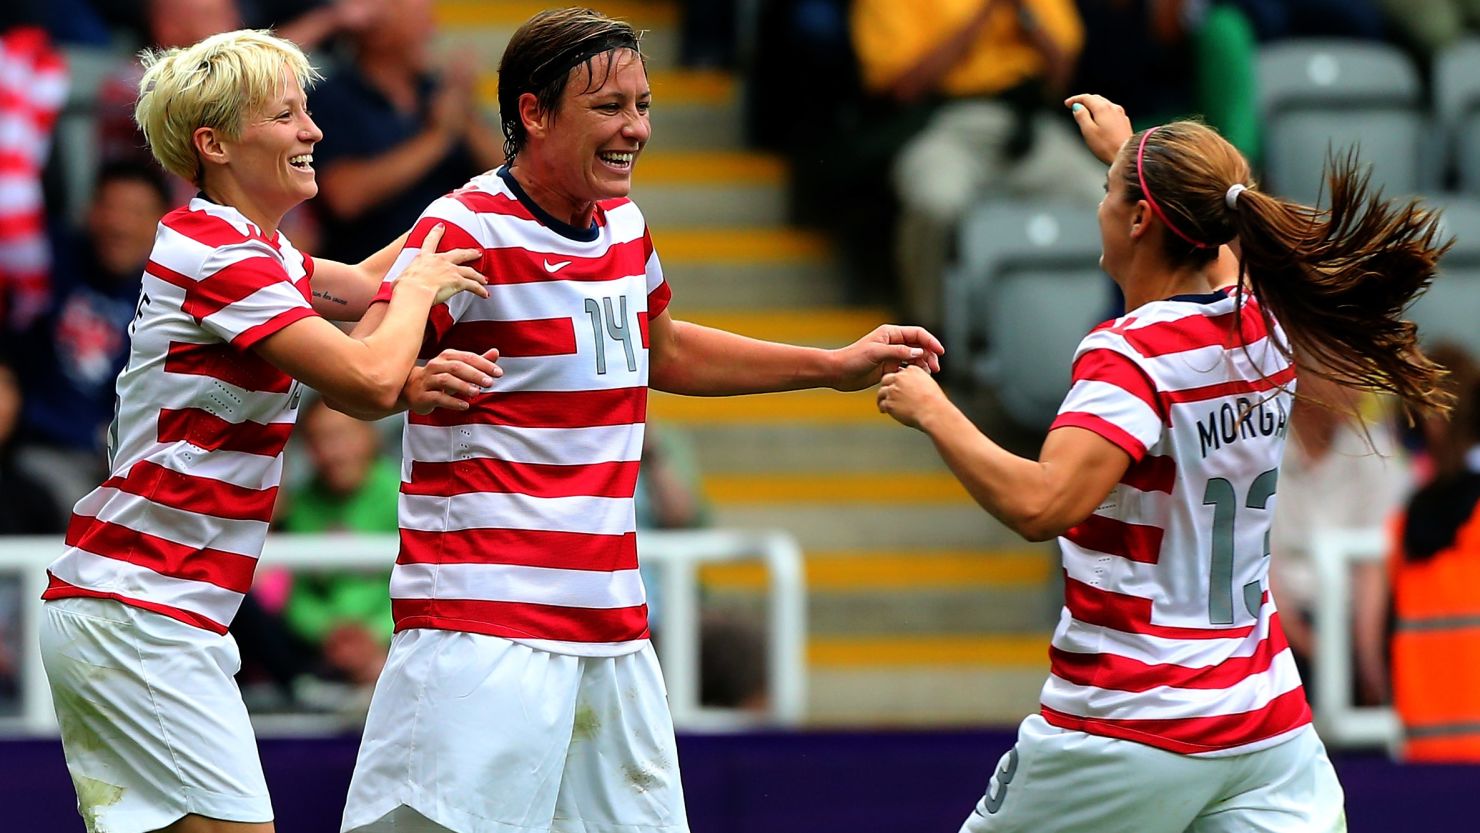 Abby Wambach, center, celebrates her goal with U.S. teammates Megan Rapinoe, left, and Alex Morgan in Newcastle.